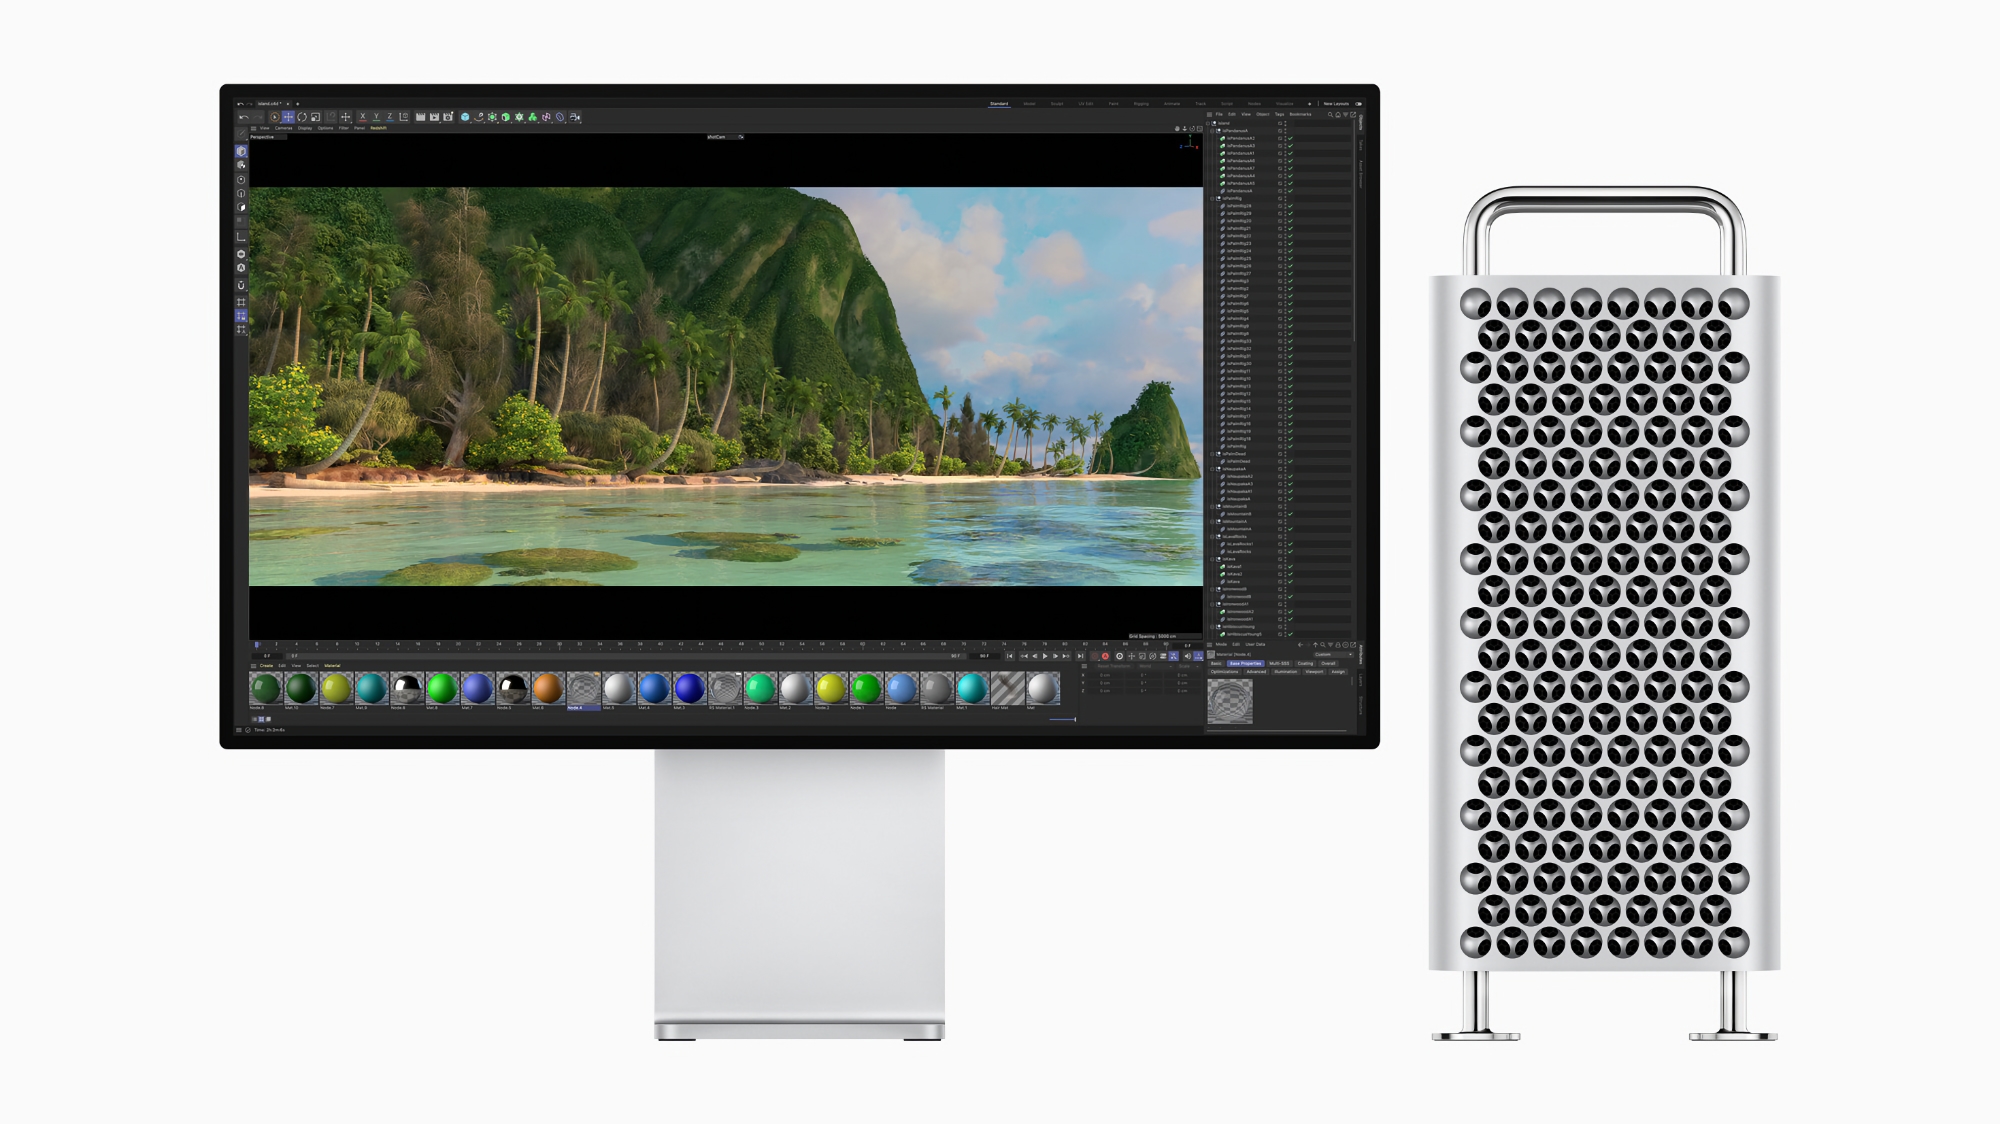 Up to $1500: Apple has started selling refurbished versions of the Mac Pro 2023 with the M2 Ultra chip